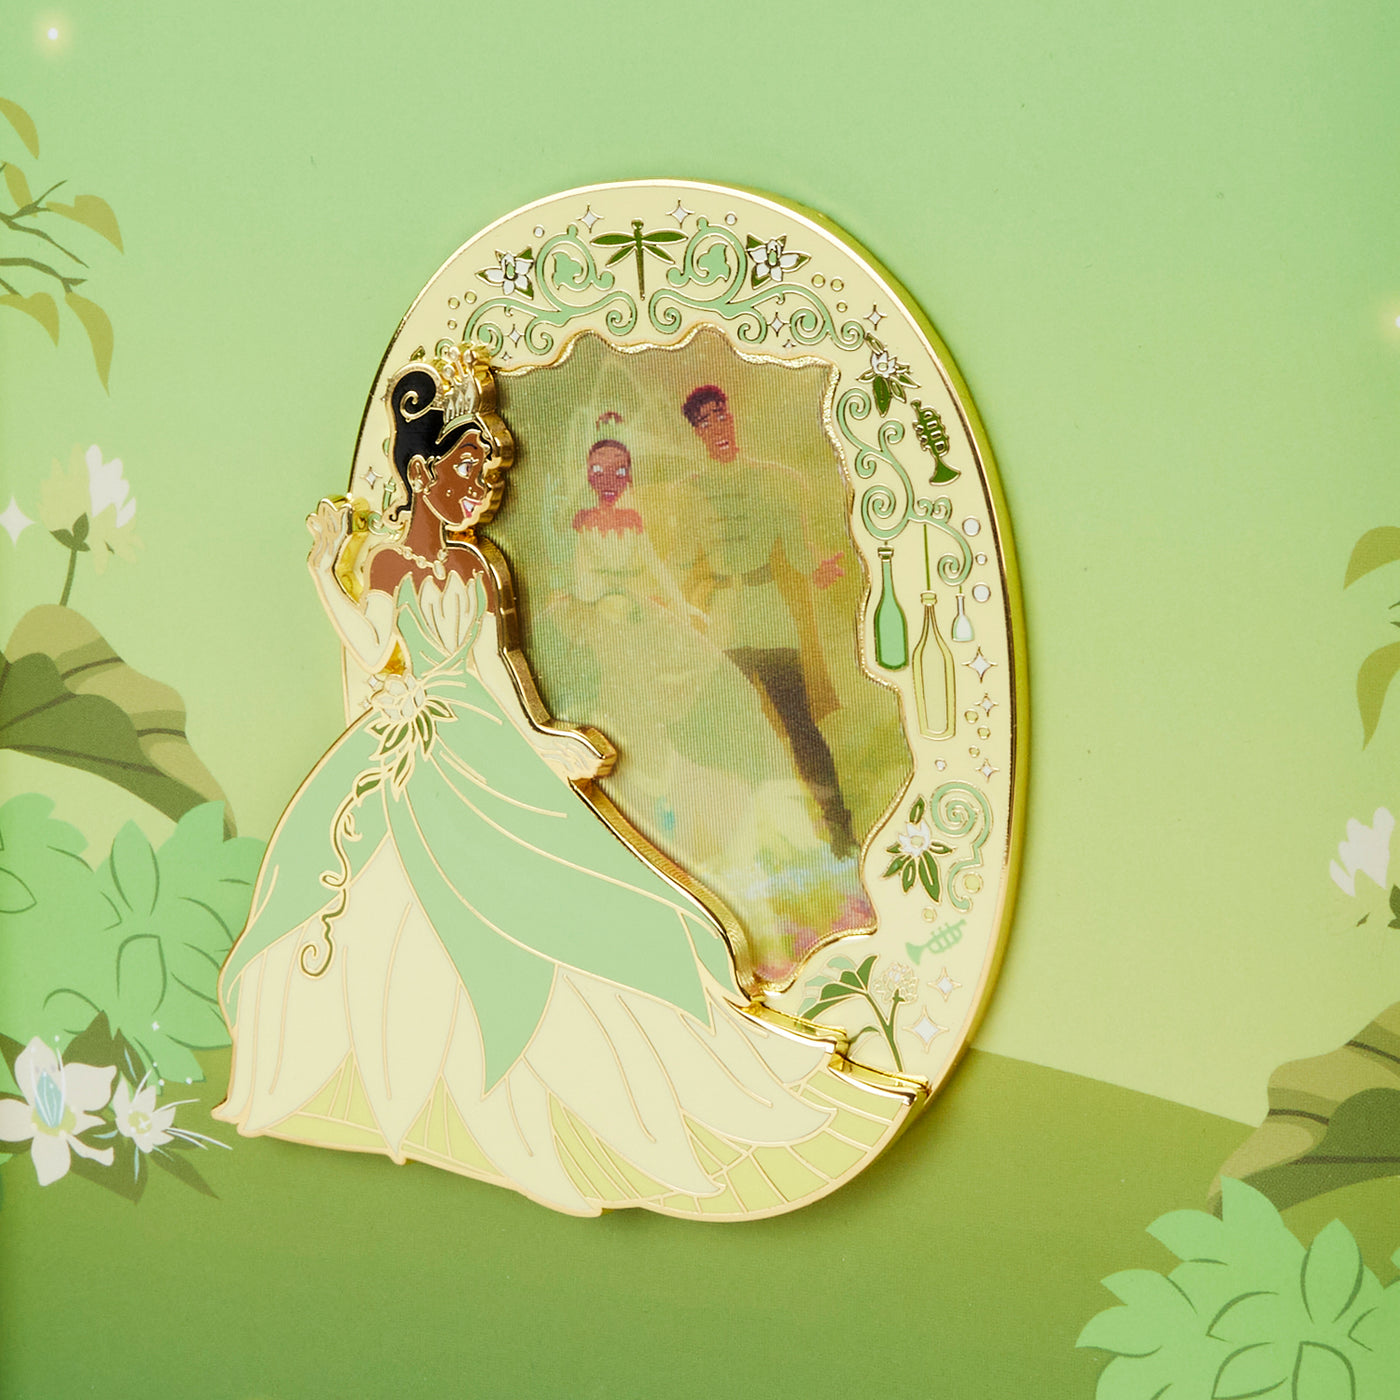 Disney Princess & the Frog Tiana Lenticular 3" Limited Edition Collector's Box Pin